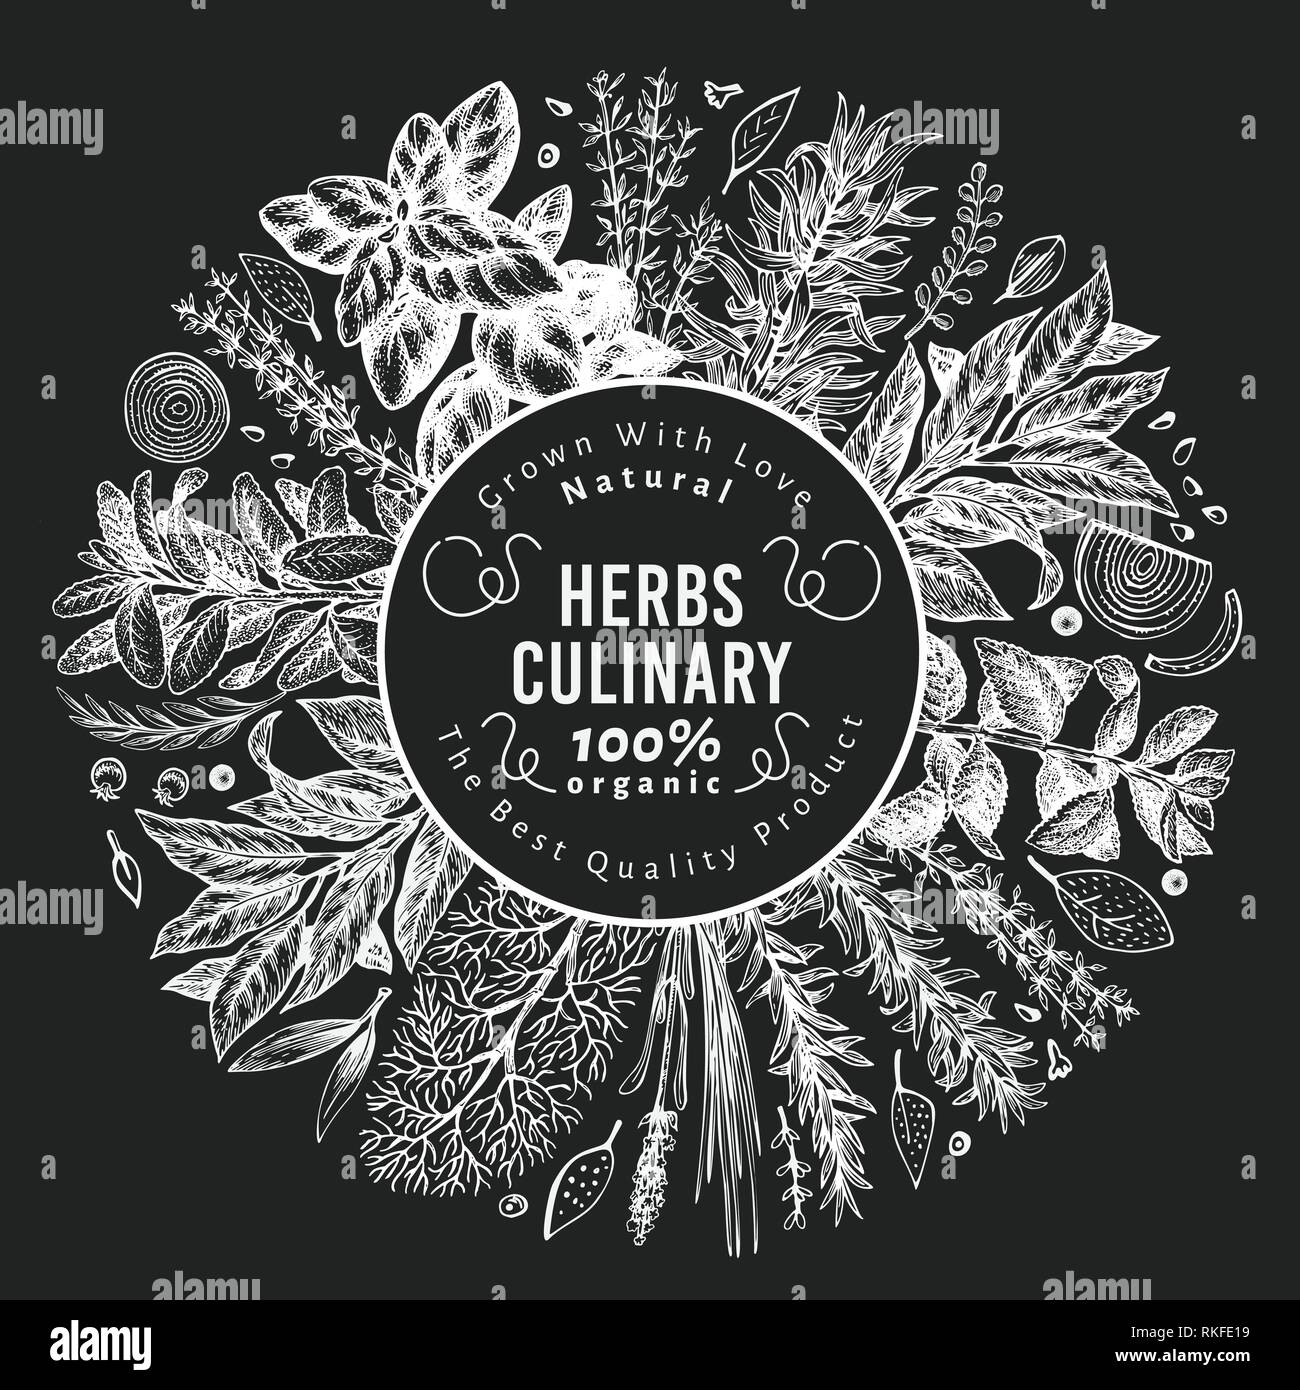 Culinary herbs and spices banner template. Vector background for design menu, packaging, recipes, label, farm market products. Hand drawn vintage botanical illustration on chalk board. Stock Vector